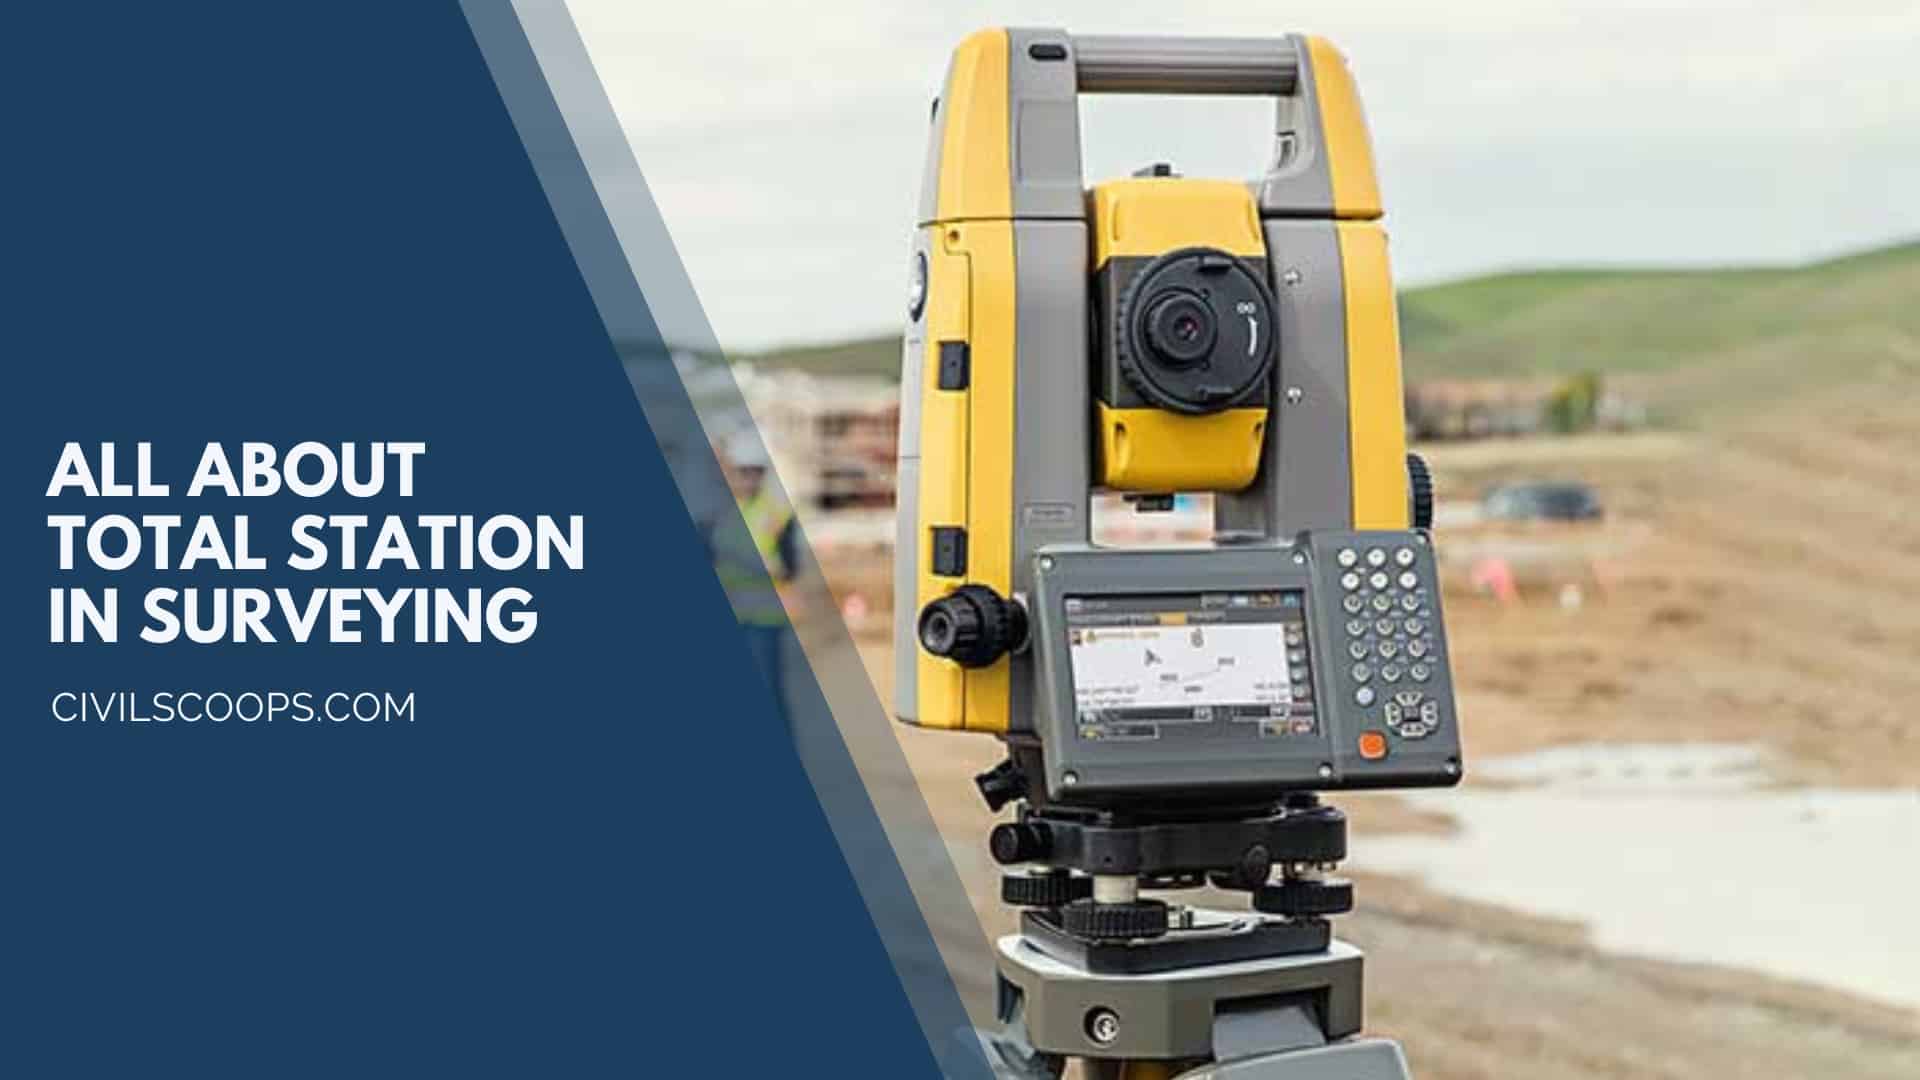 All About Station in Surveying